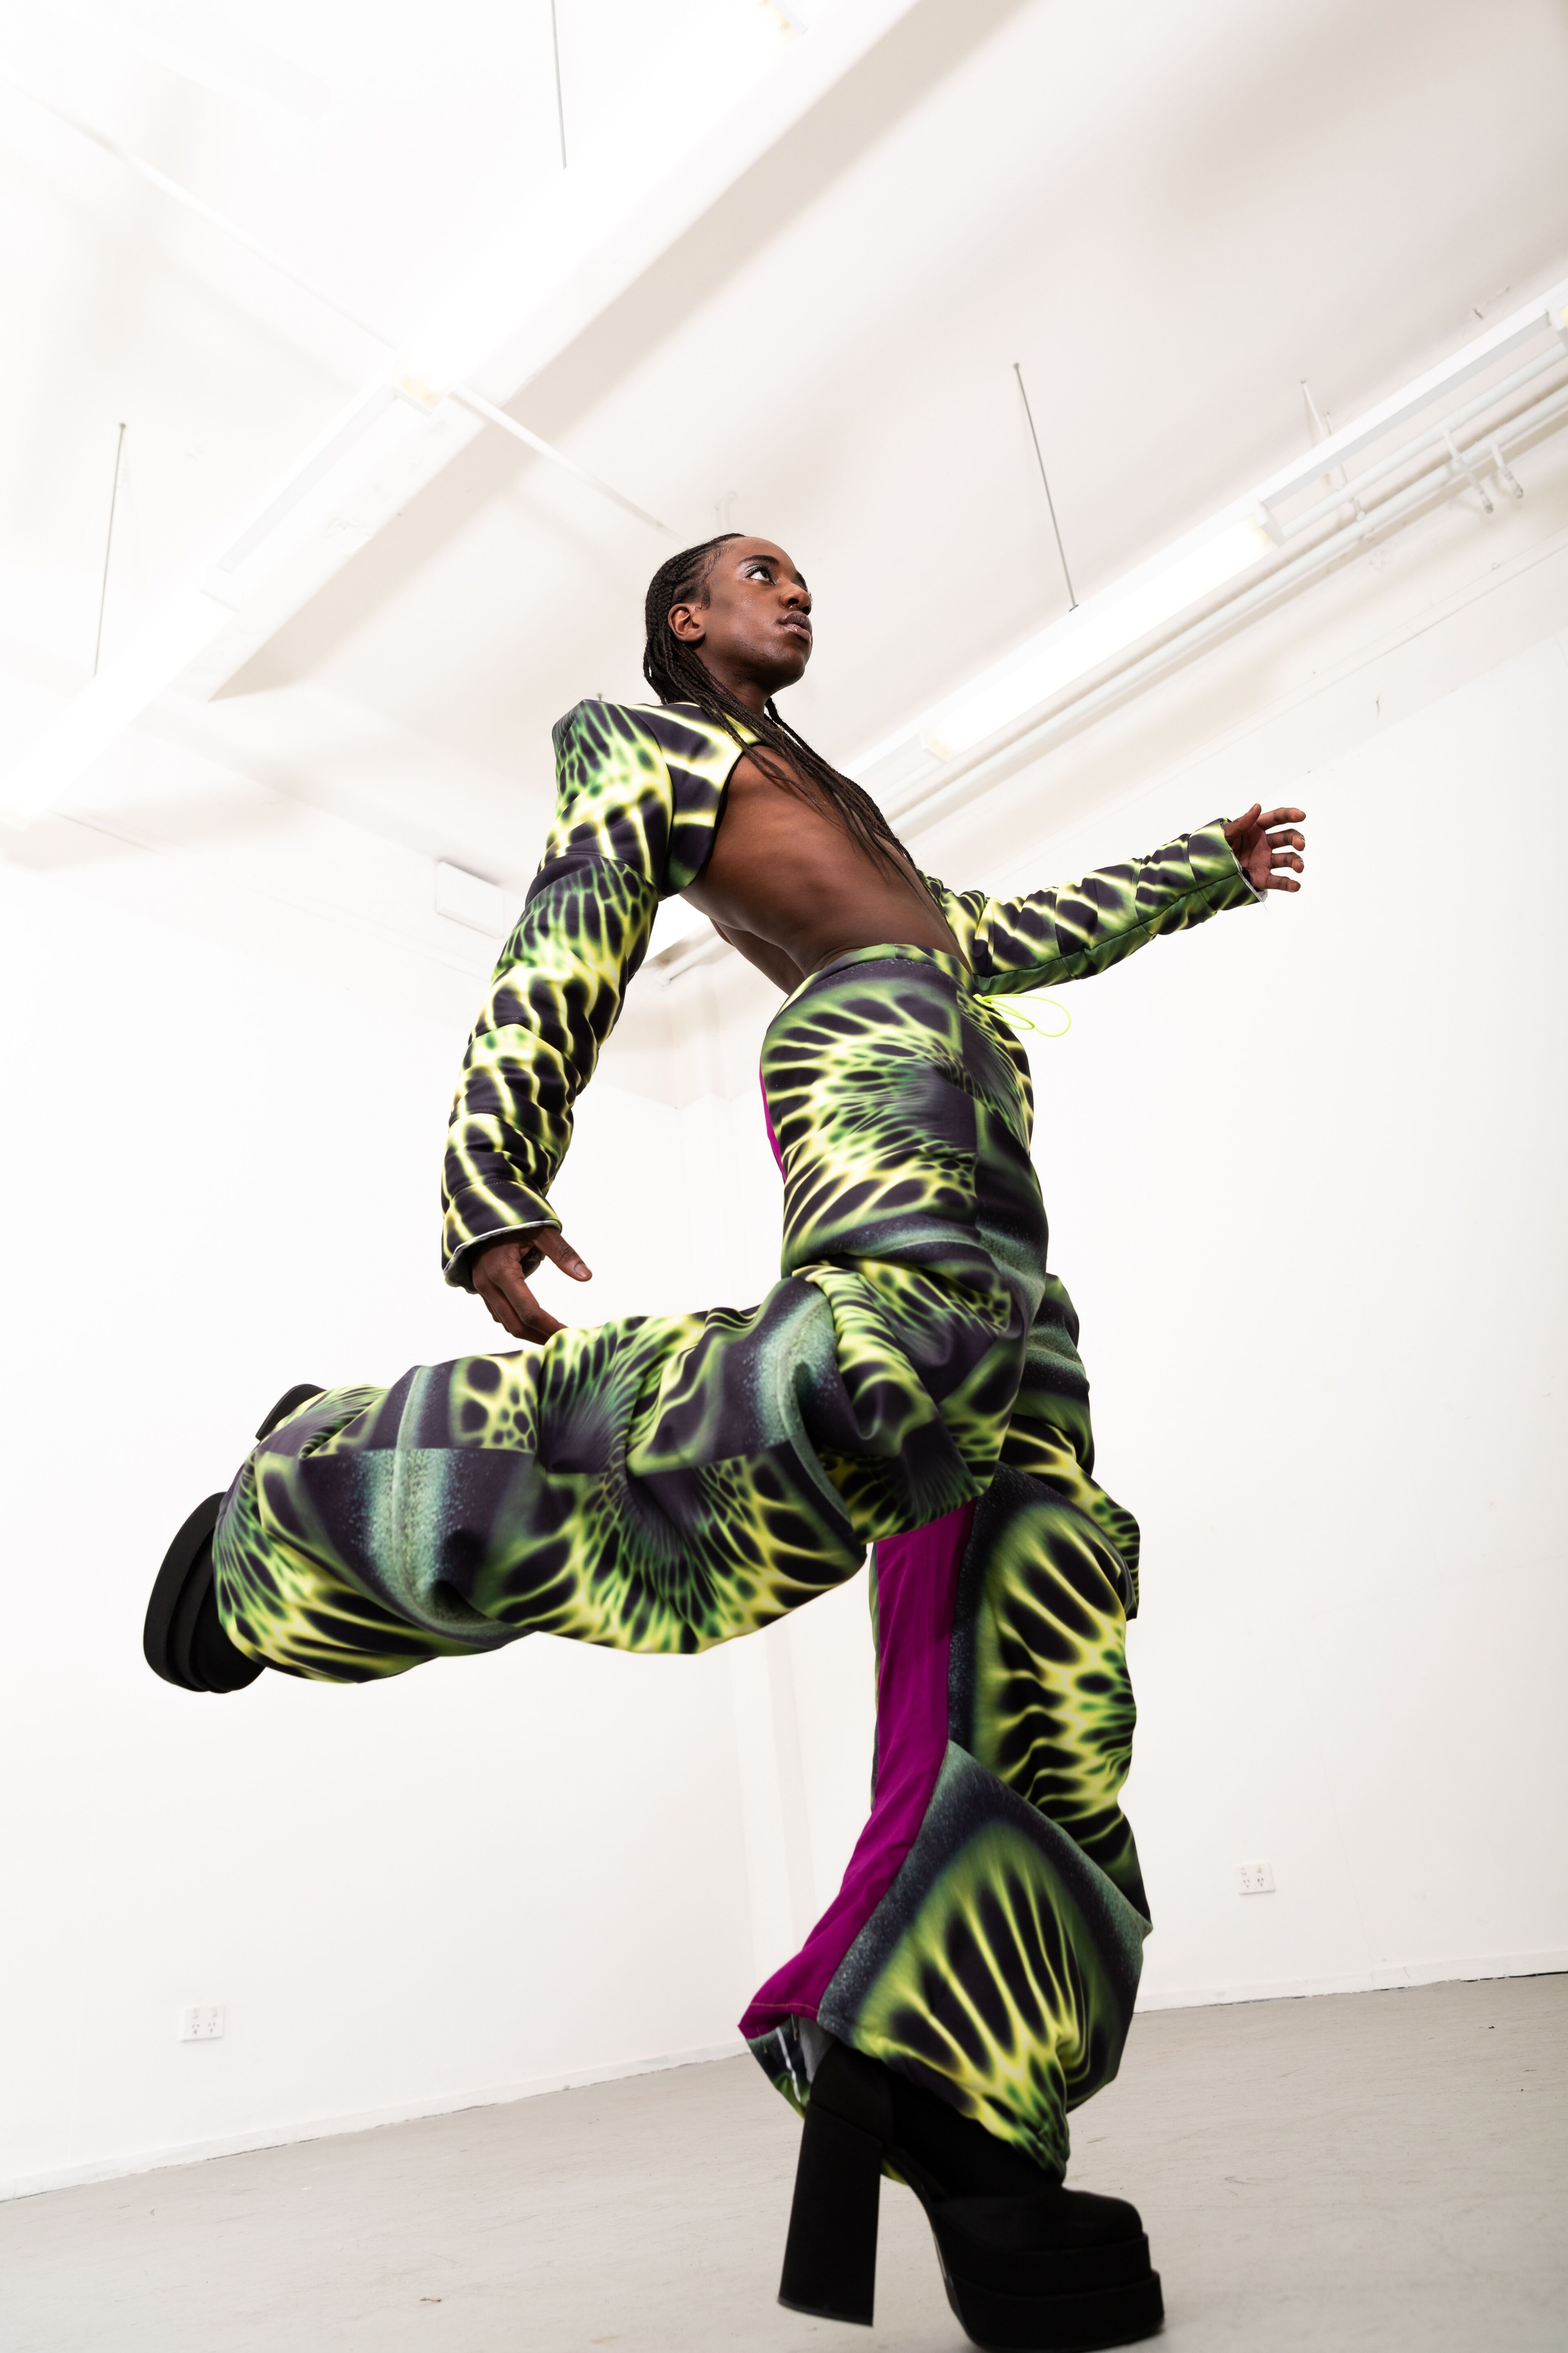 A model is captured a mid-movement pose, showcasing a bold, neon-patterned outfit.